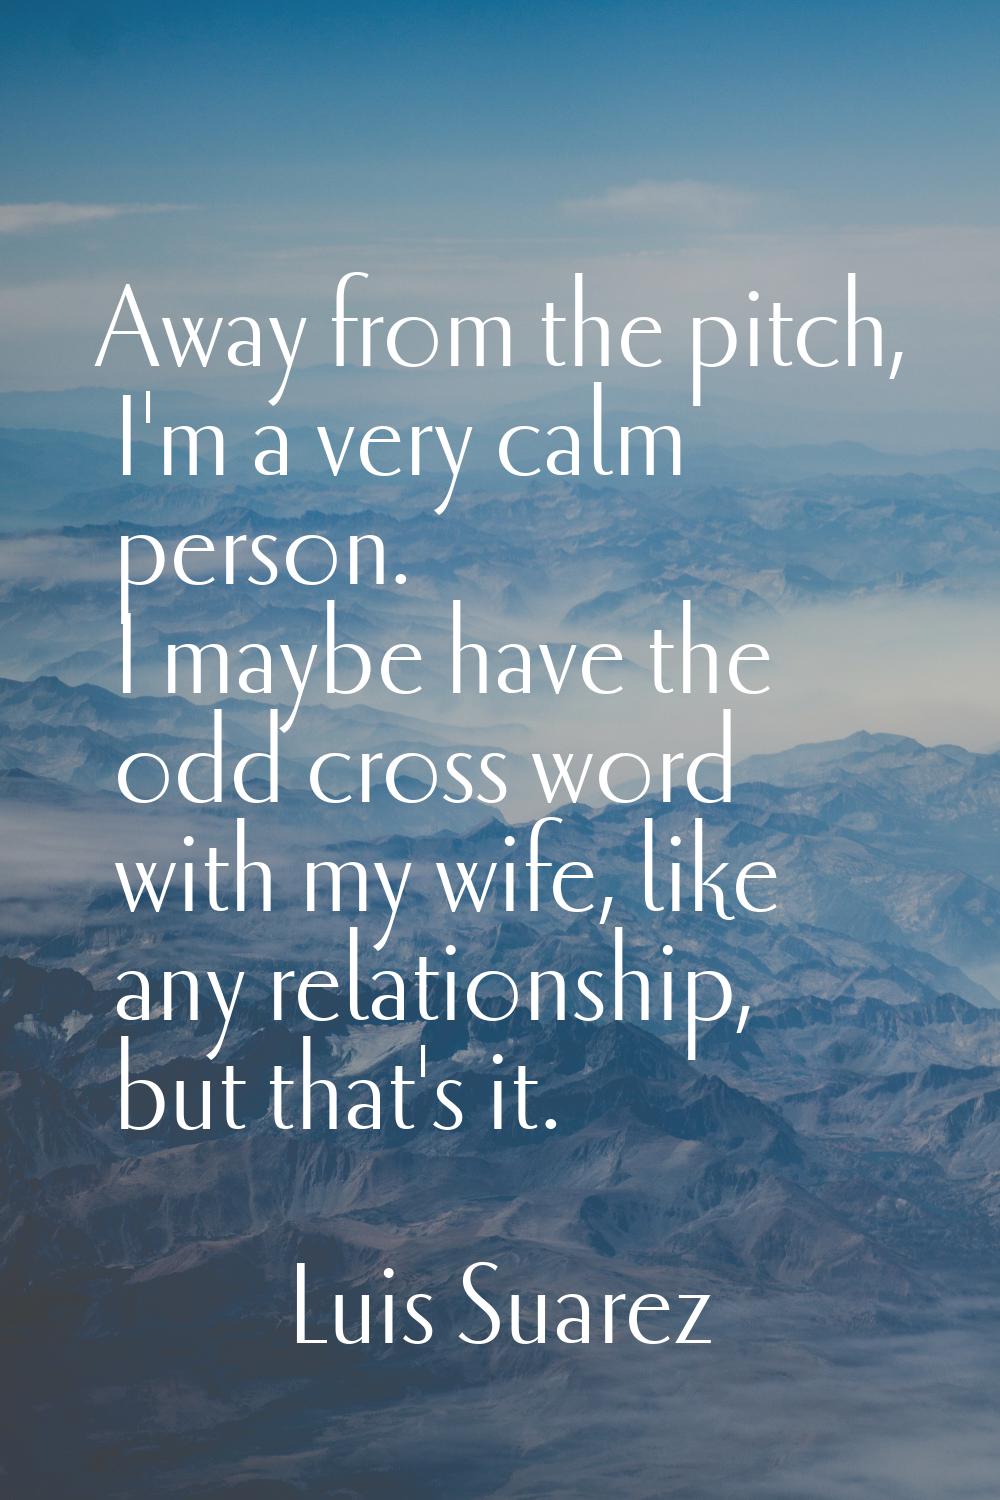 Away from the pitch, I'm a very calm person. I maybe have the odd cross word with my wife, like any